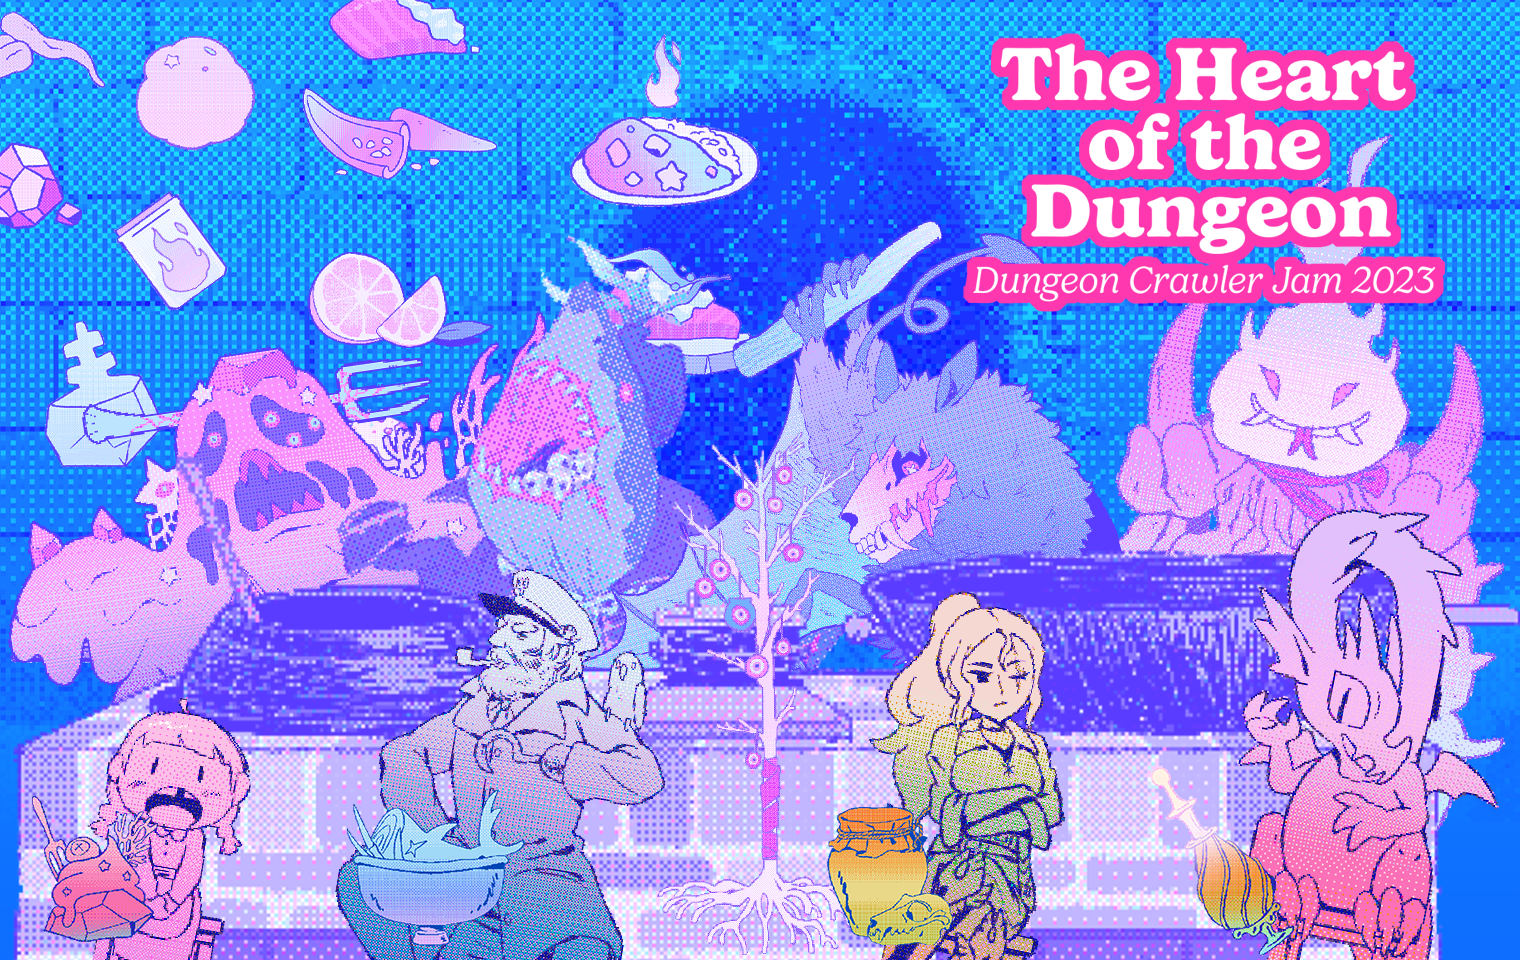 The Heart of the Dungeon